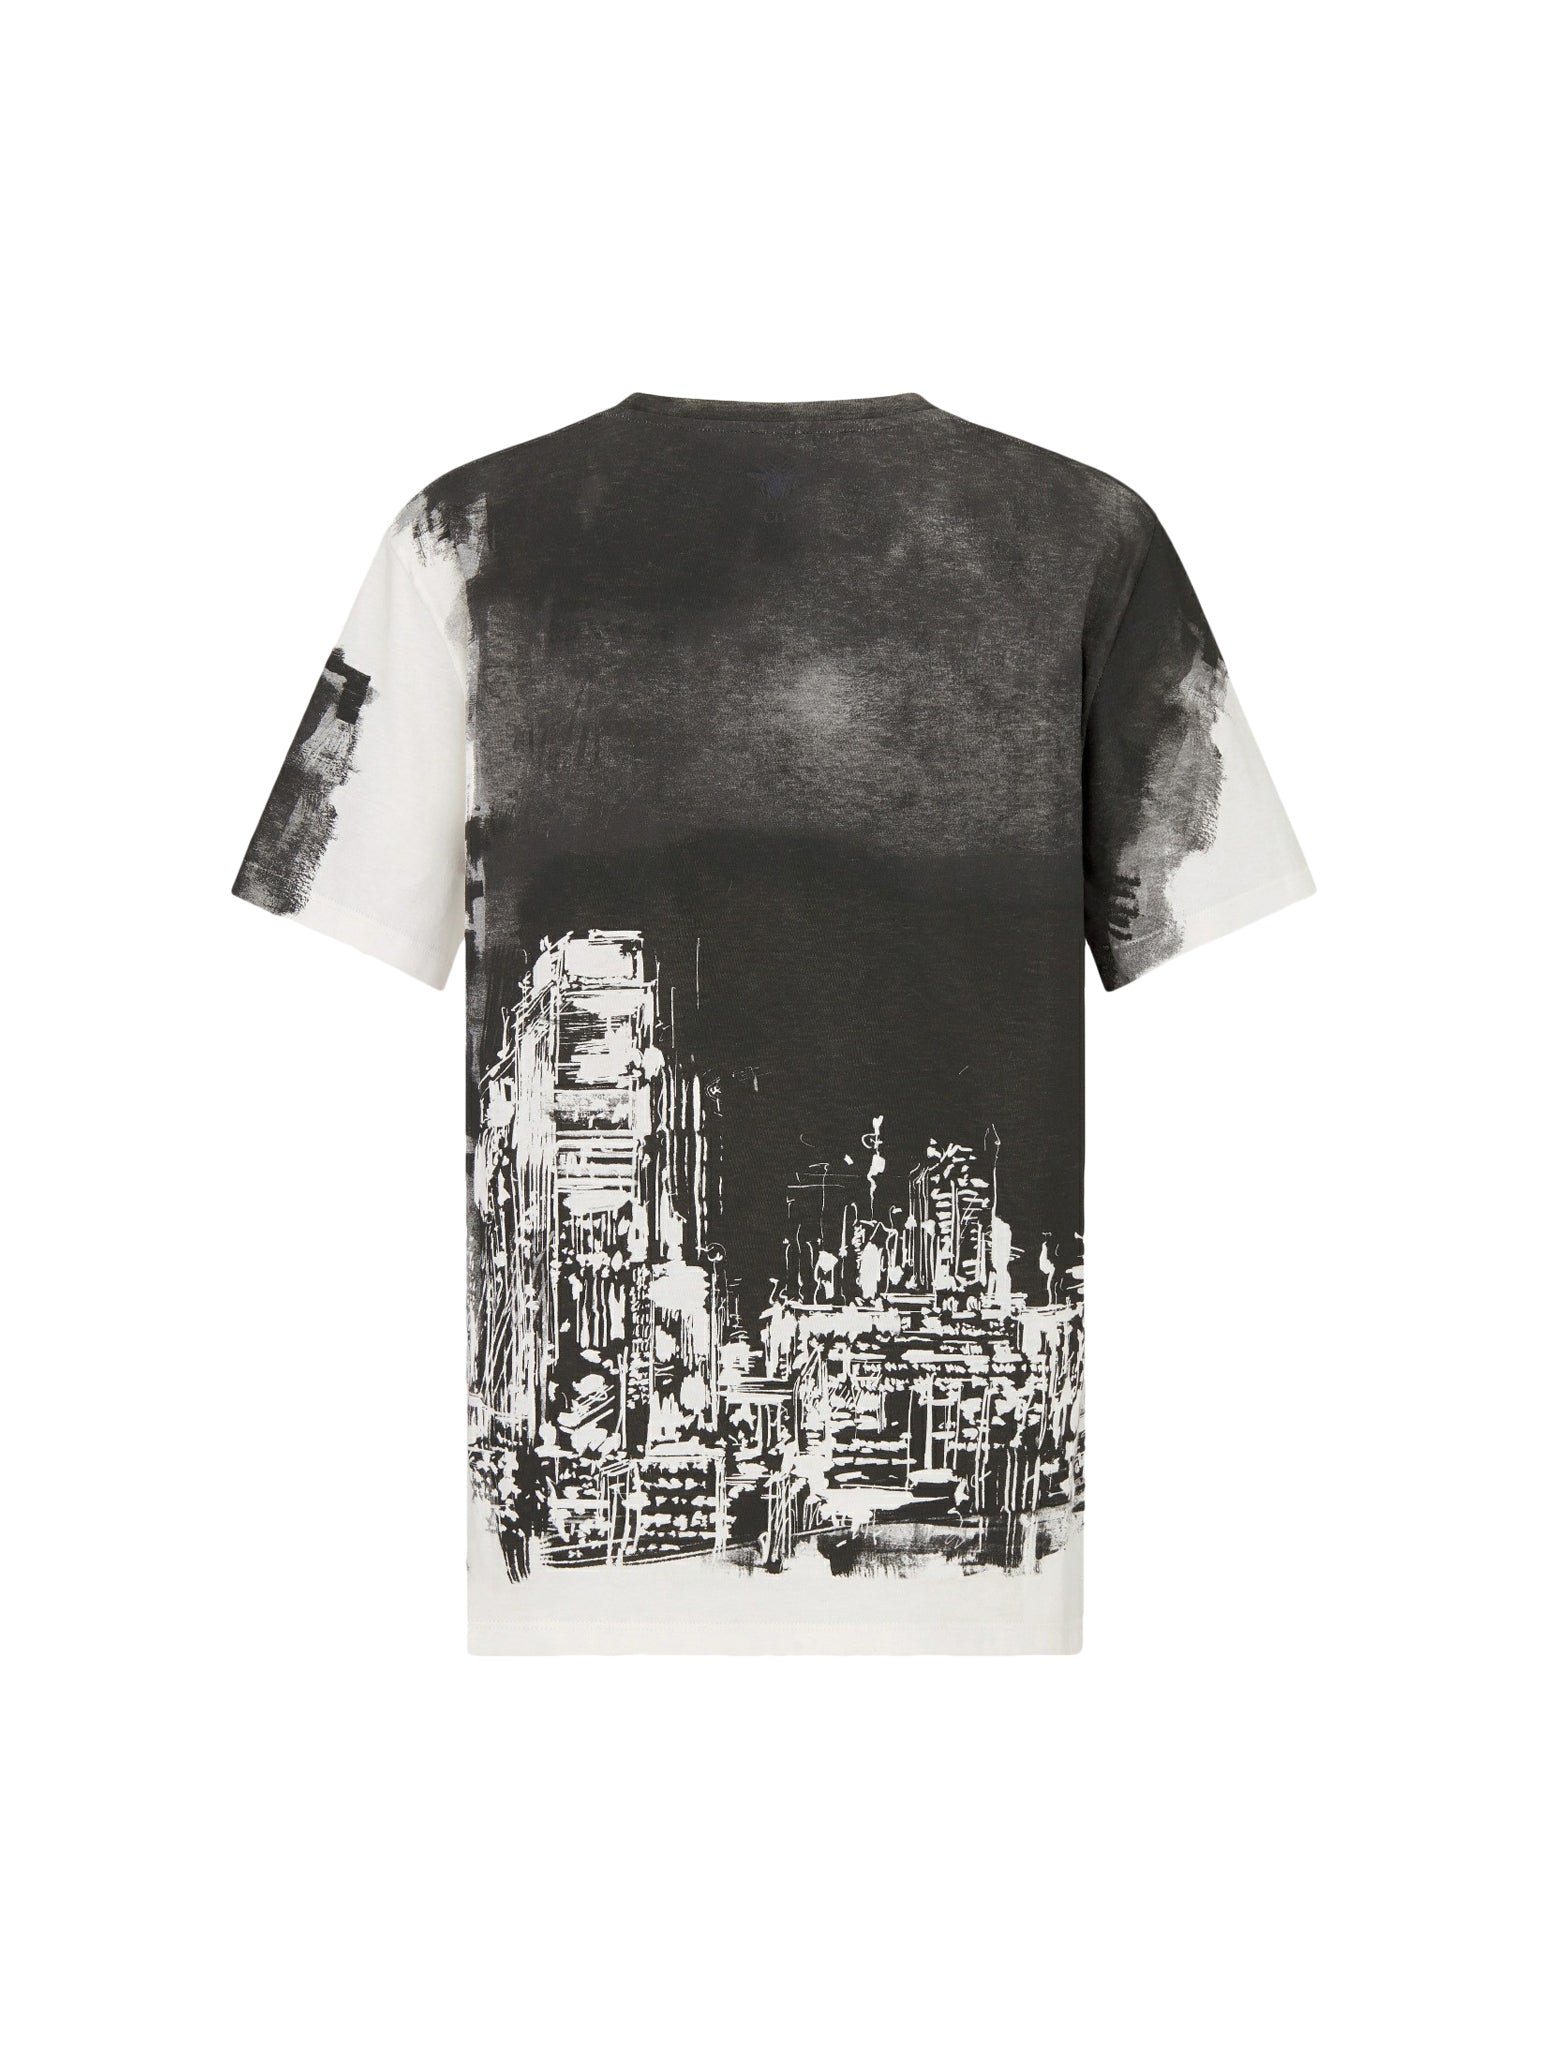 T-shirt in black and white cotton and linen jersey with New York motif